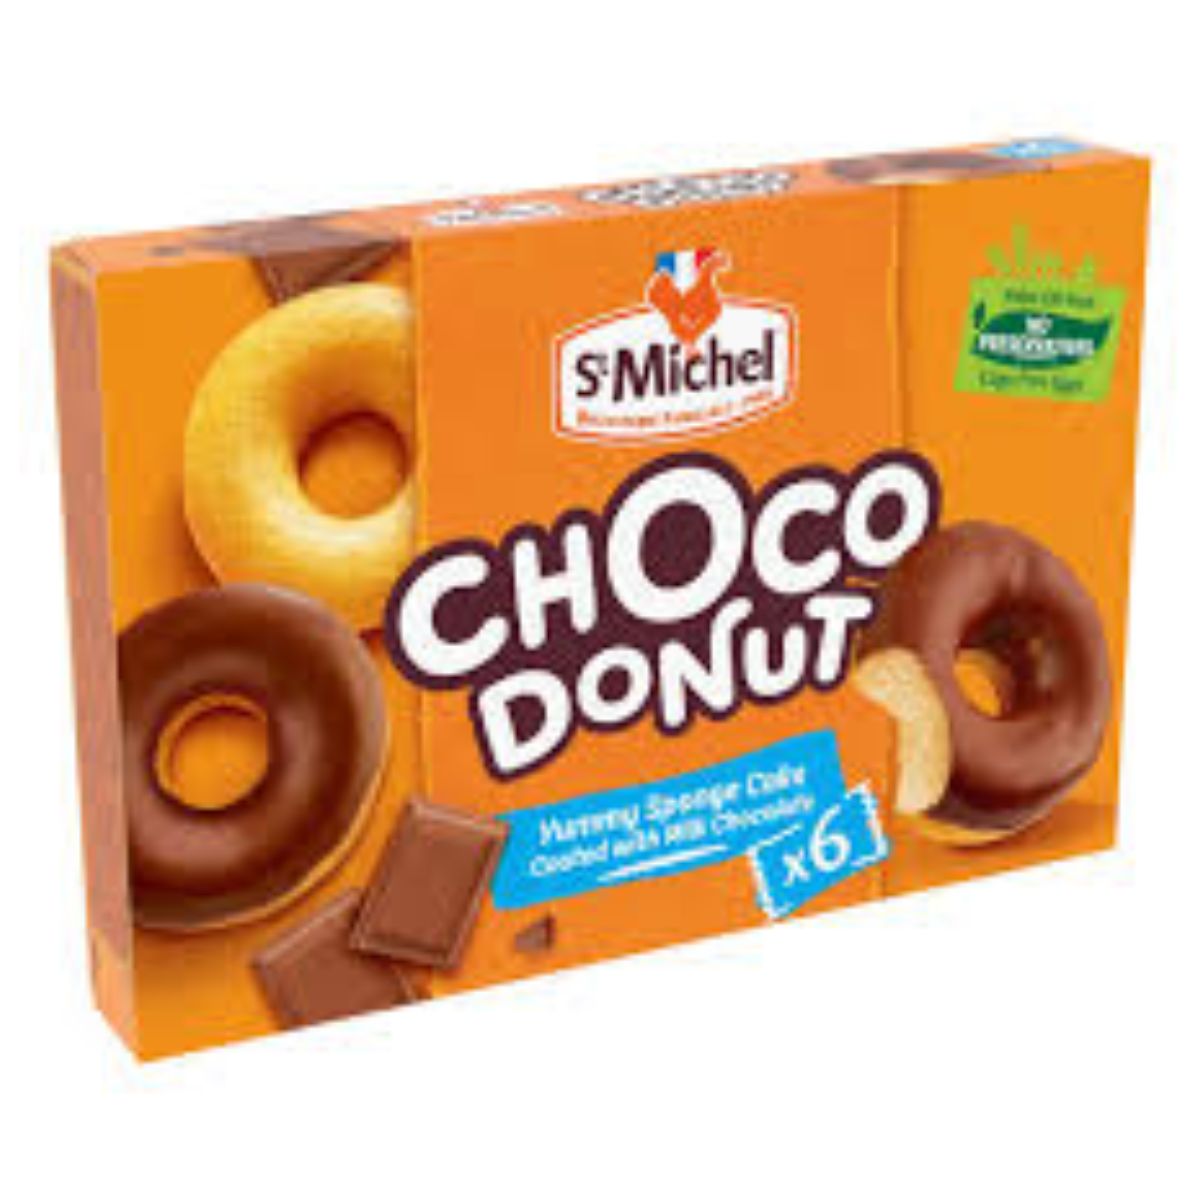 A box of St Michel - Doonuts Chocolate Coated - 6pcs, featuring six chocolate-coated sponge donuts, with the "palm oil free" label visible.